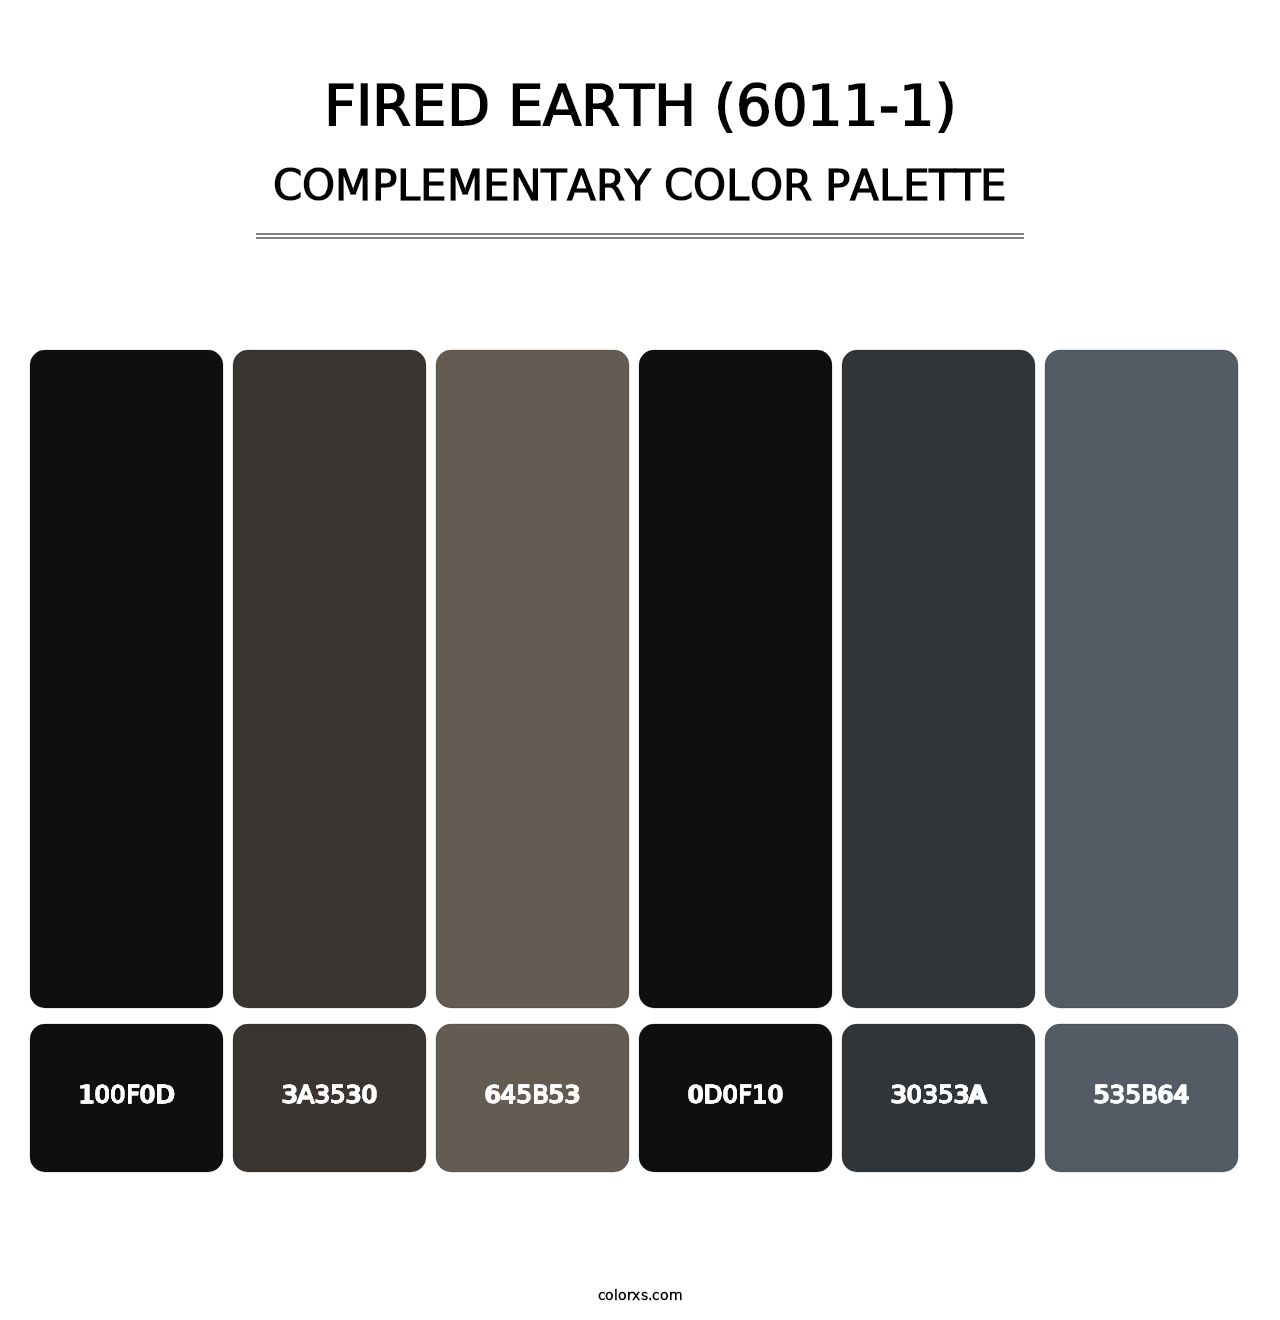 Fired Earth (6011-1) - Complementary Color Palette